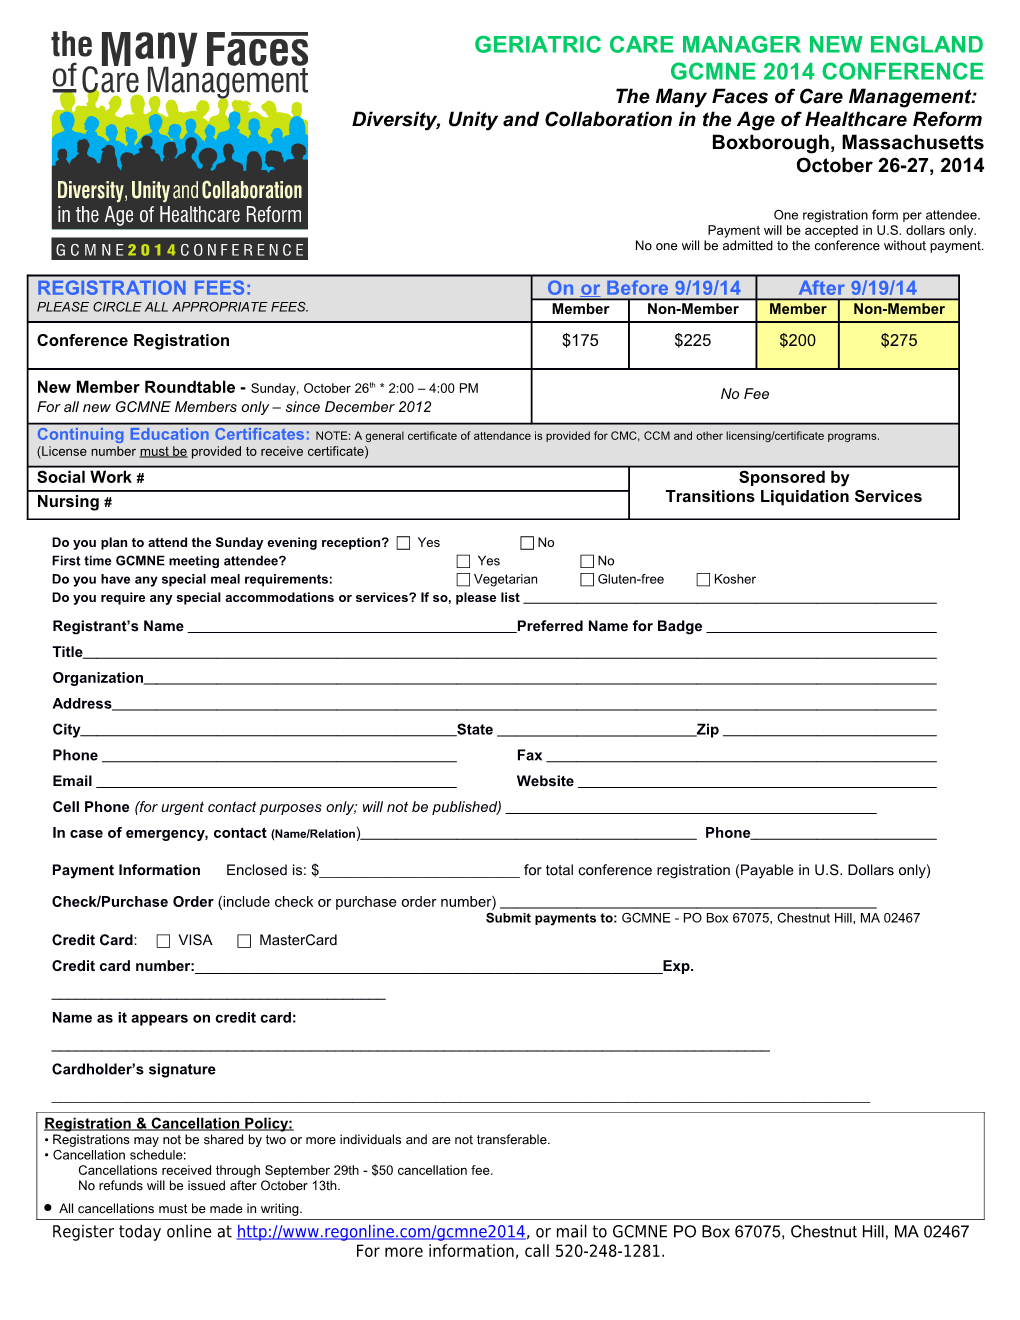 AURP Annual Conference Registration Form s1